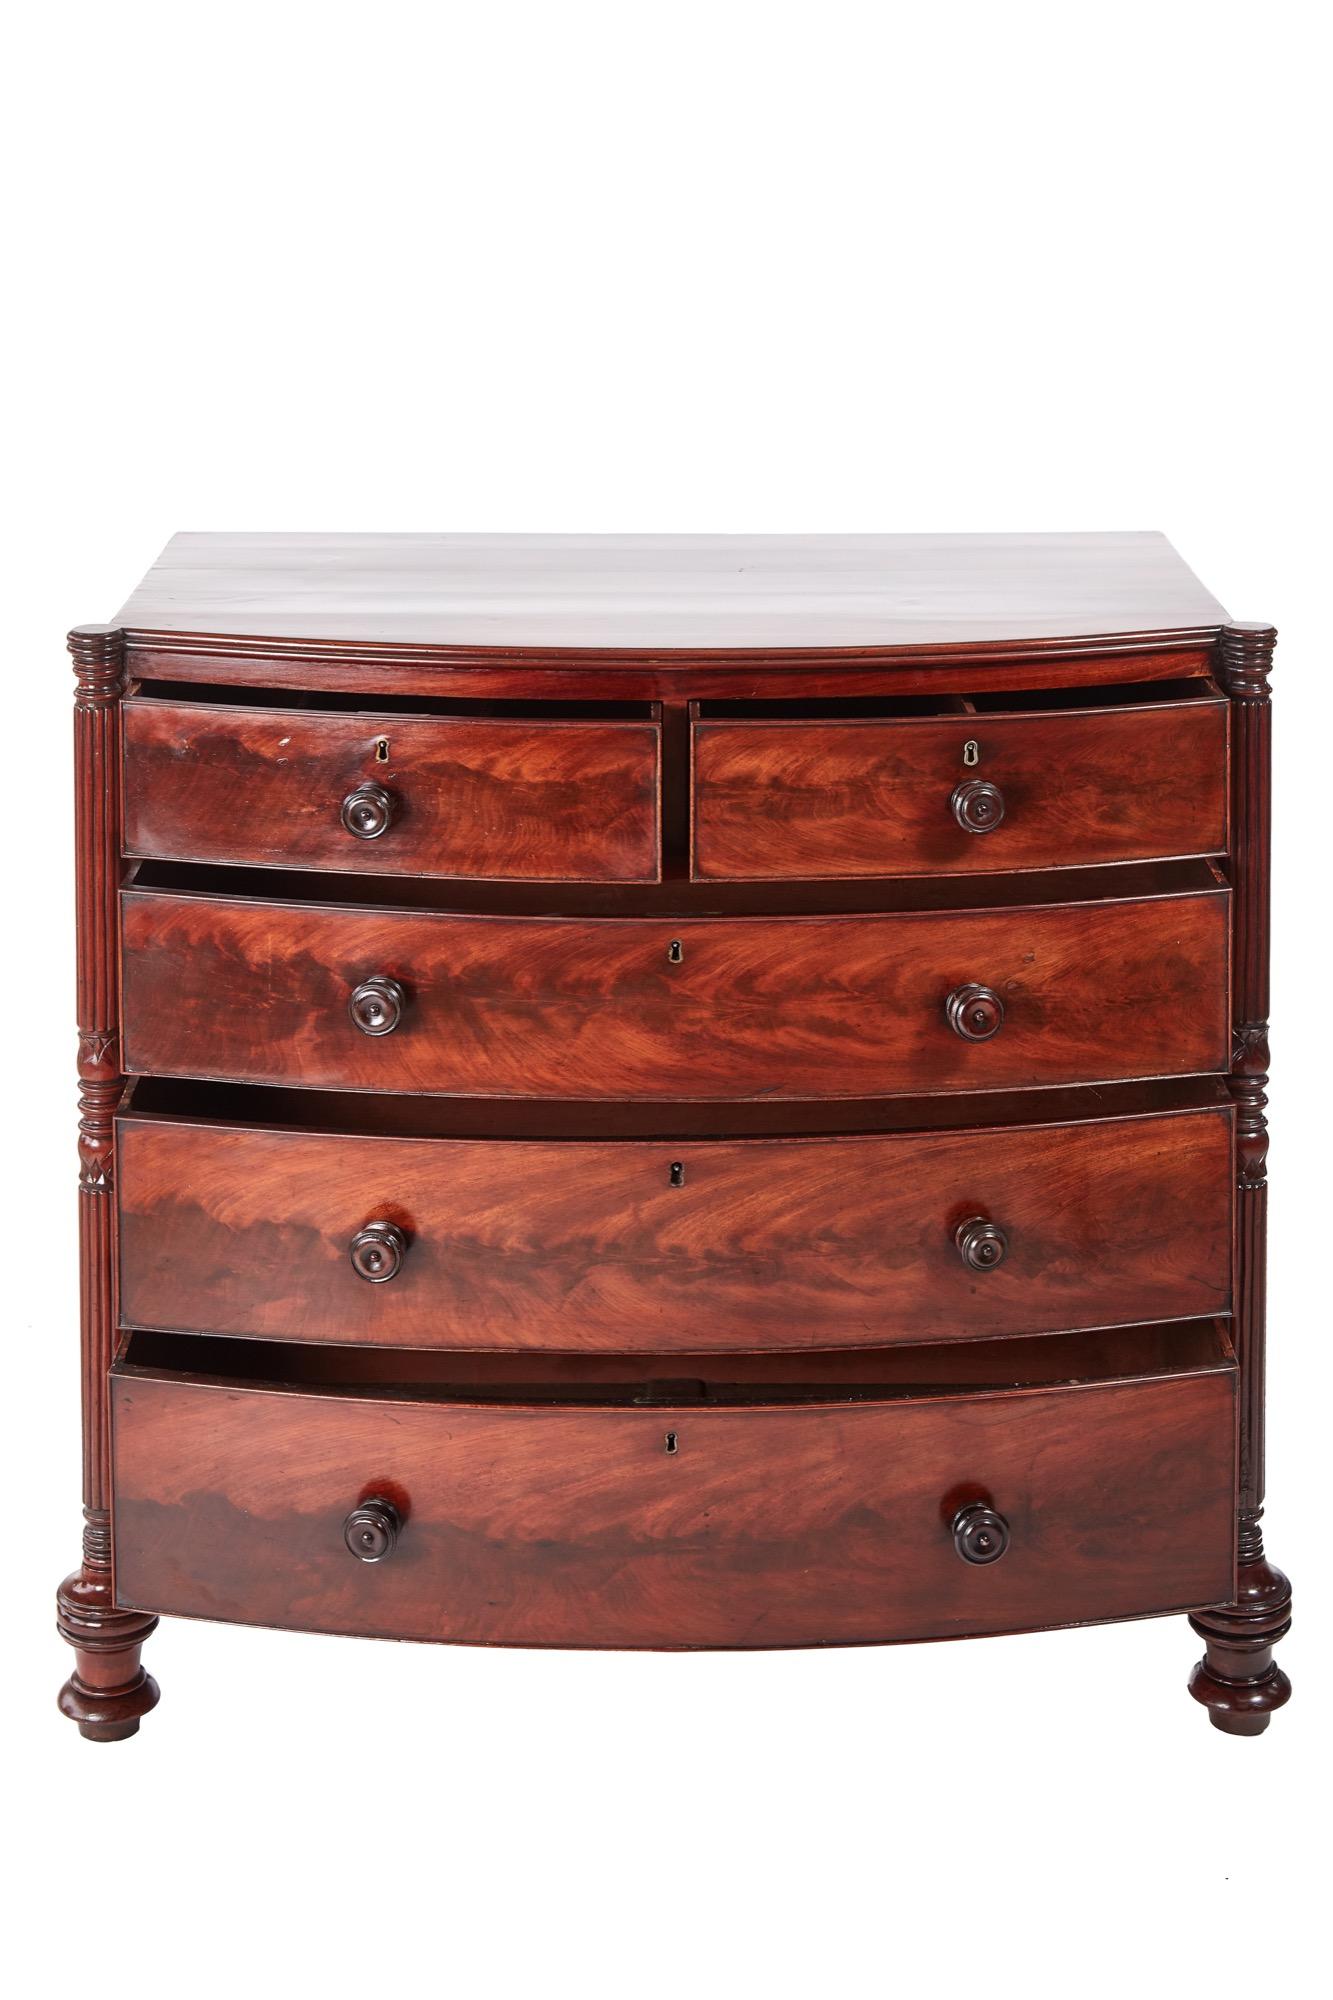 Quality Regency mahogany bow front chest of drawers, having a lovely mahogany top, two short and three long drawers with original turned mahogany knobs, lovely carved turned reeded columns, standing on turned feet
Lovely color and